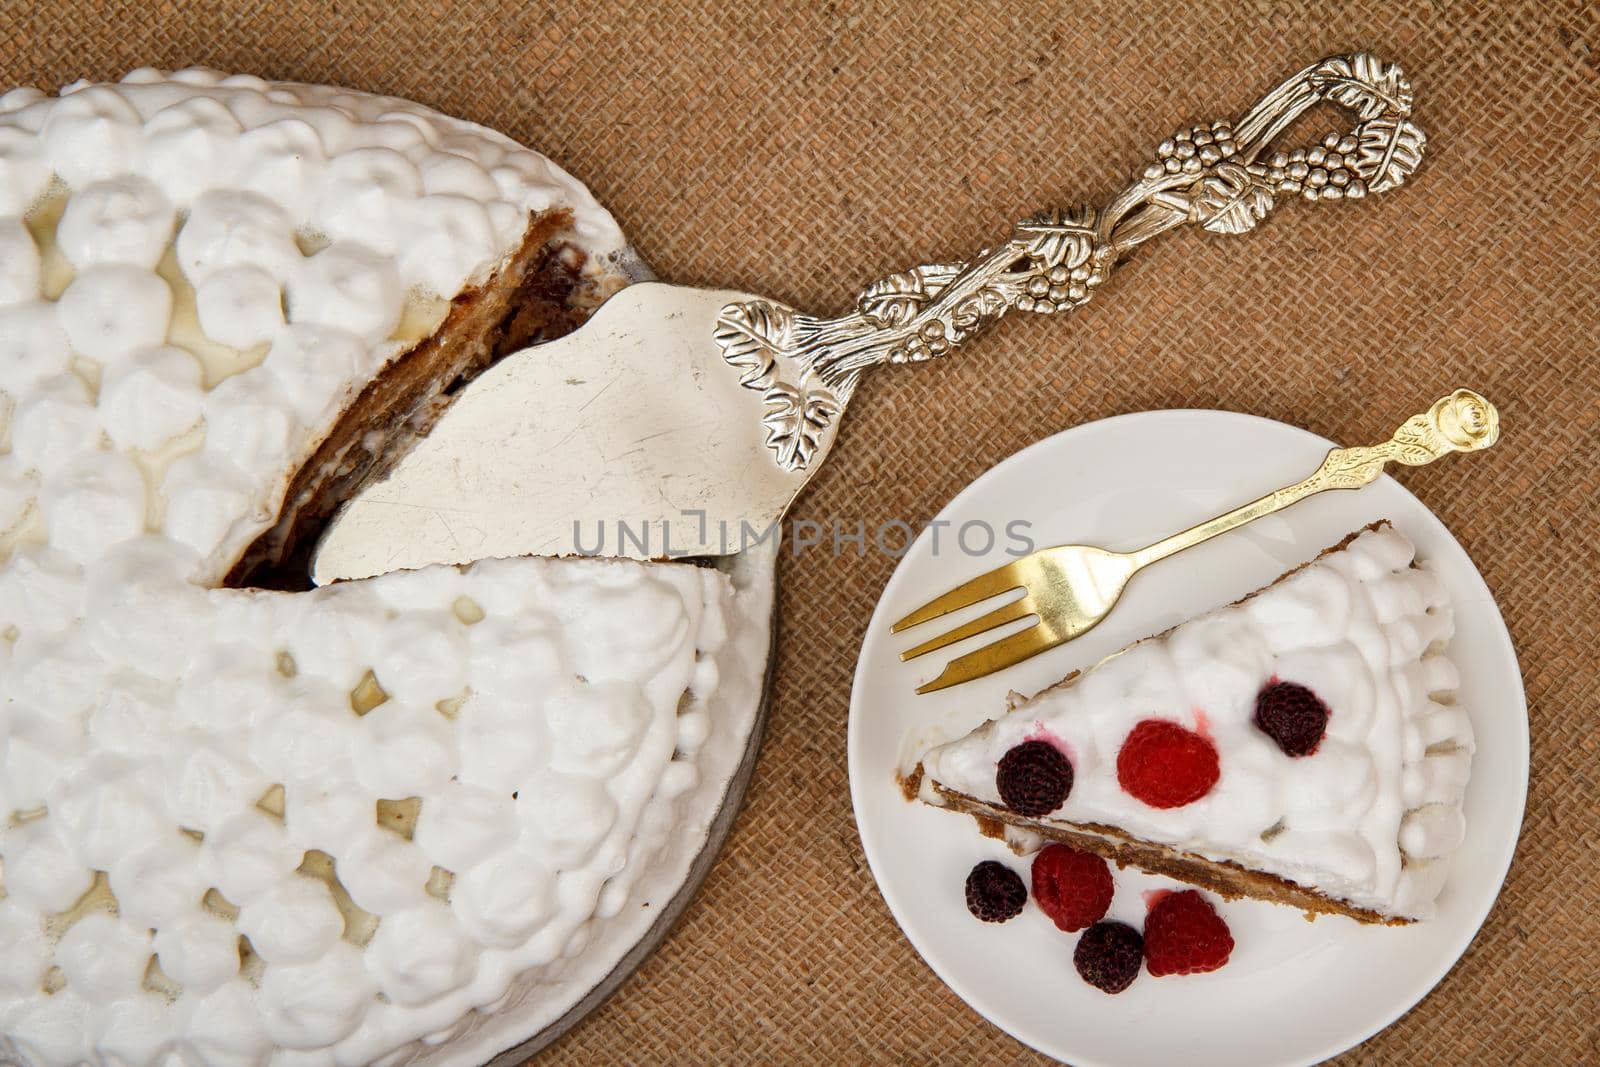 Sliced biscuit cake decorated with whipped cream and raspberries, silver cake lifter beside it on table with sackcloth. Top view